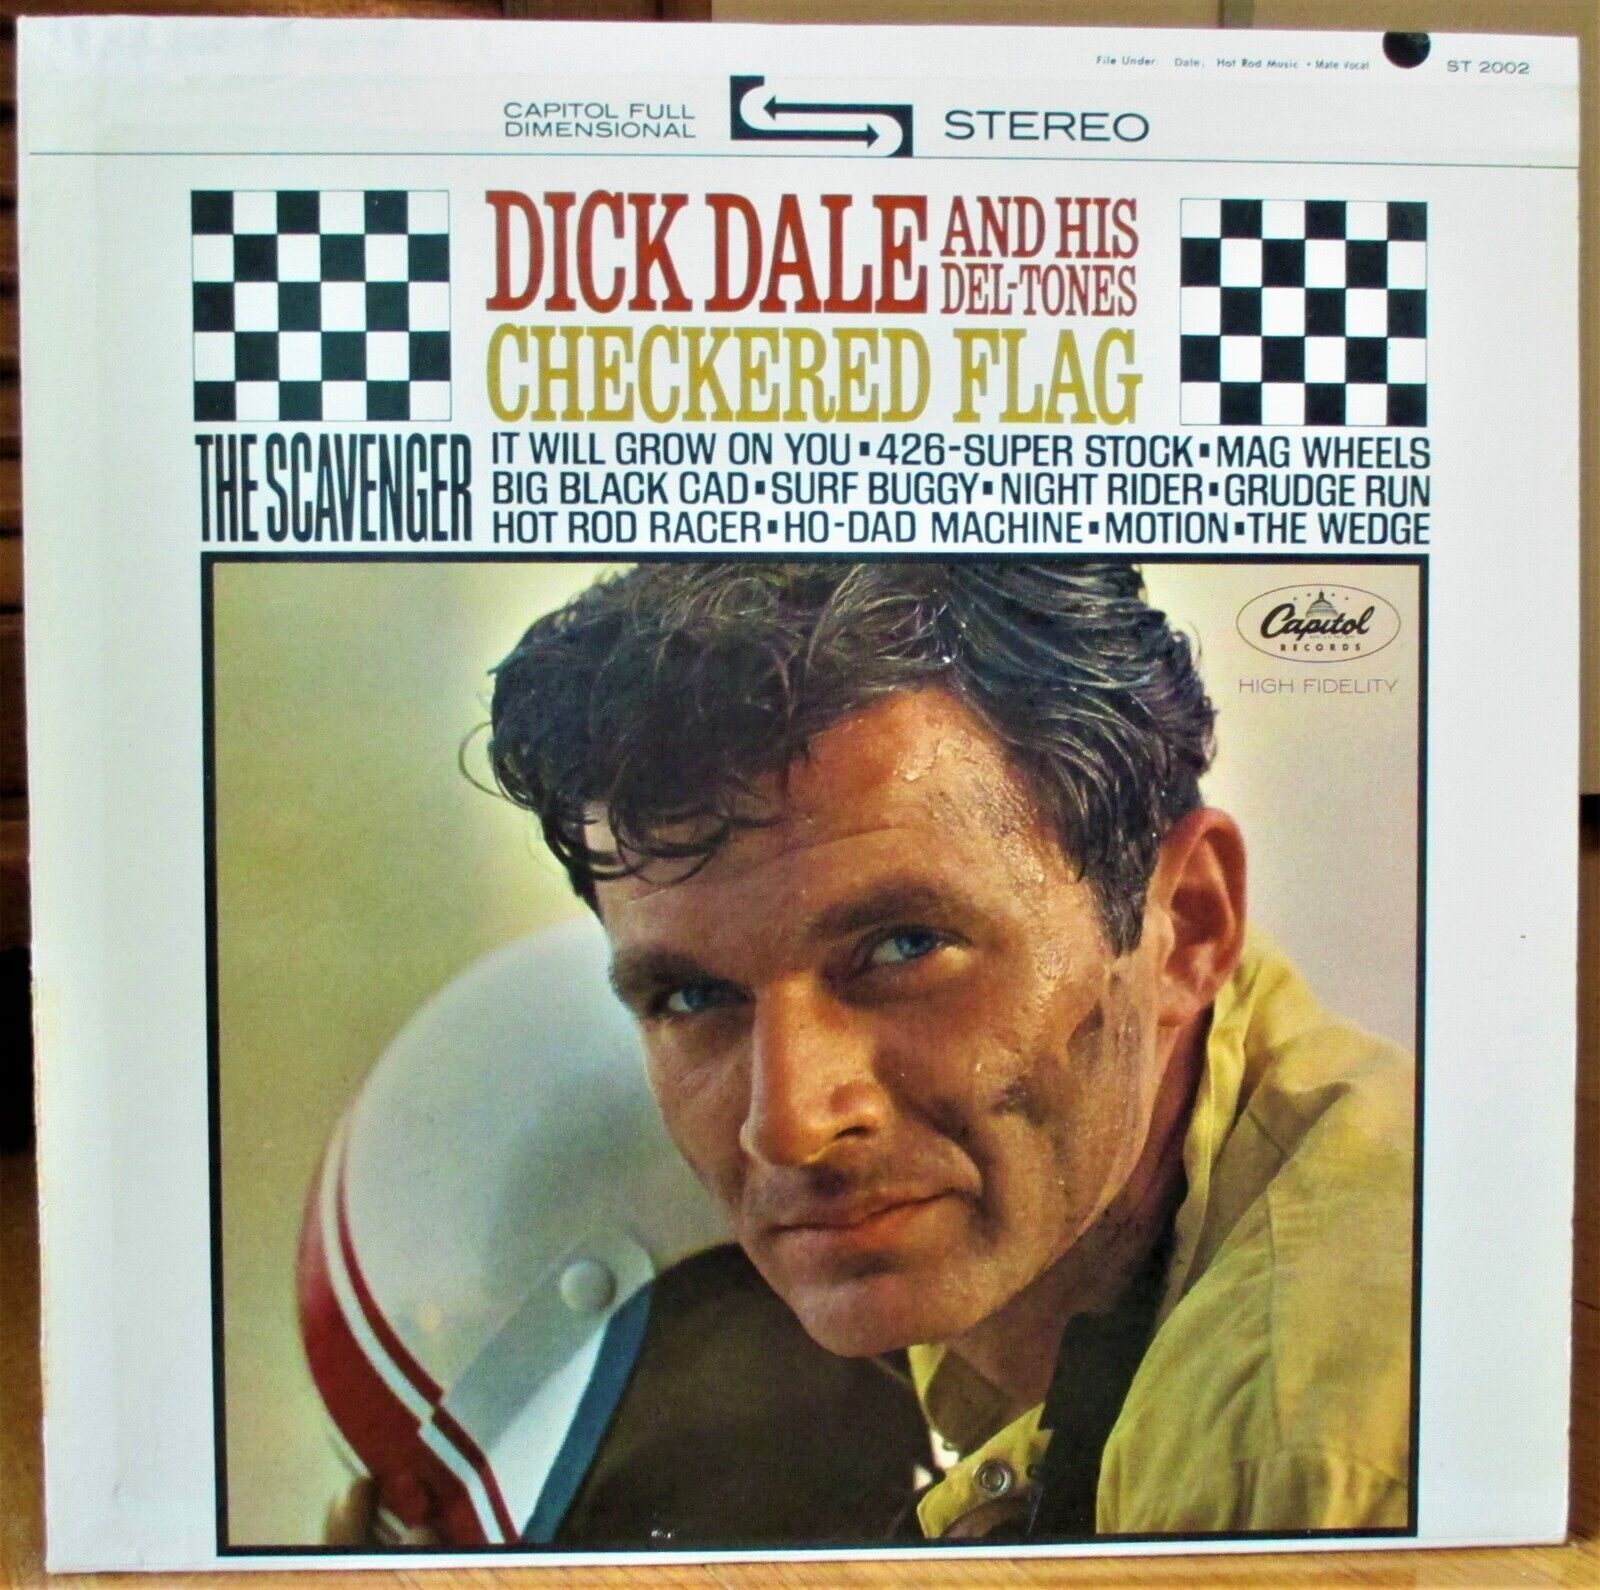 ORIG '63 Capitol STEREO LP Dick Dale And His Del-Tones Checkered Flag VG++/VG++